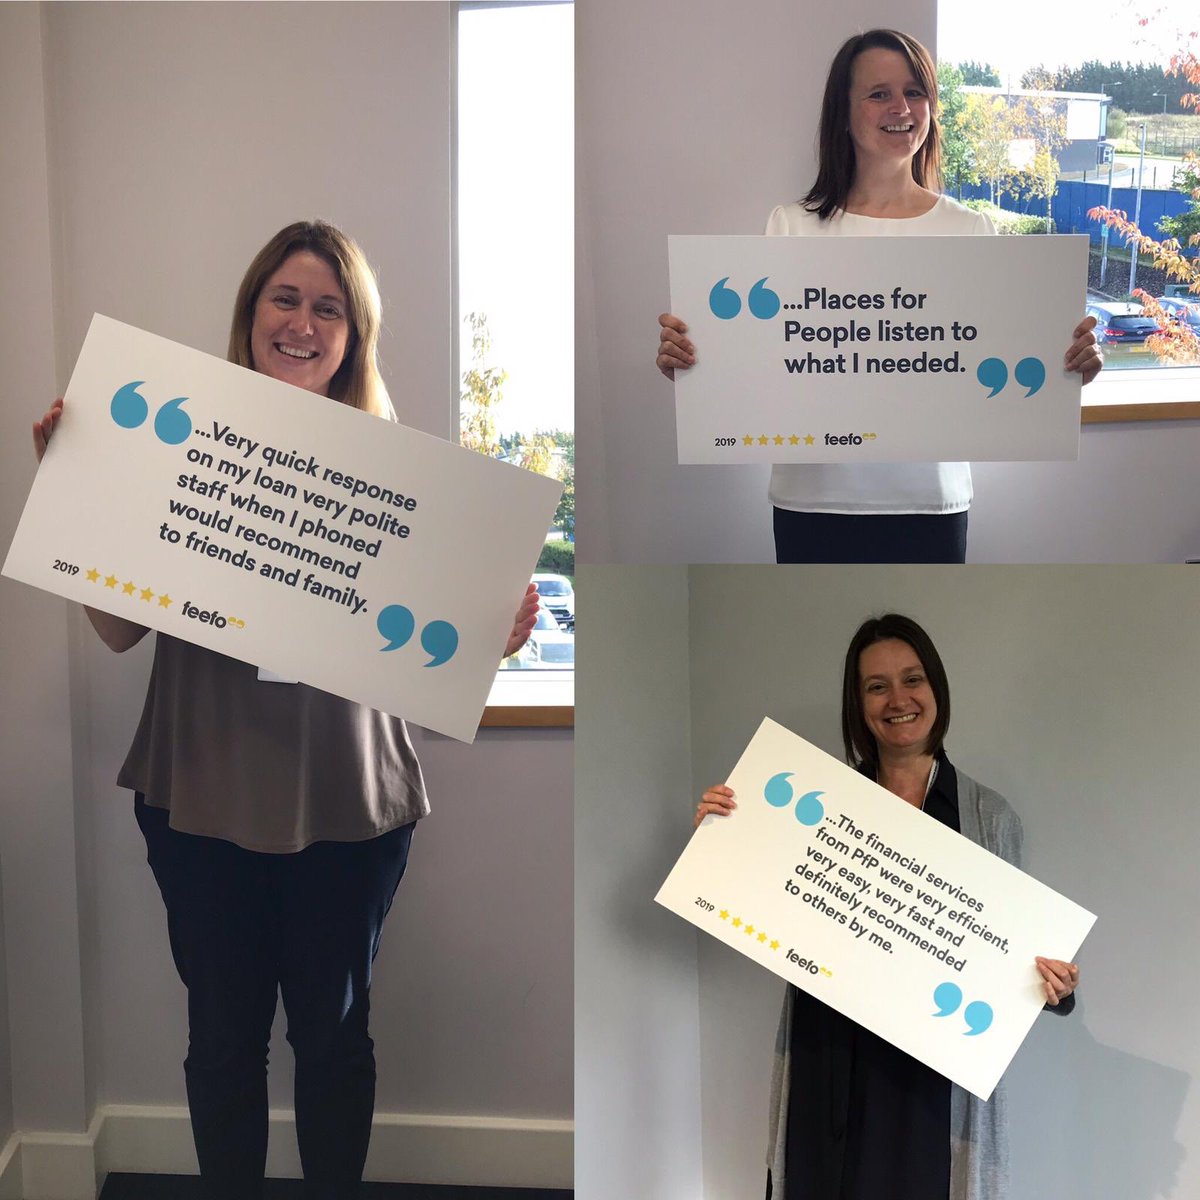 We are very happy when we se positive reviews from customers we help - here are our #CustomerServiceWeek2019 heroes to show you what our customer’s say on Feefo #PeopleFirst #NCSW19 #CSHero